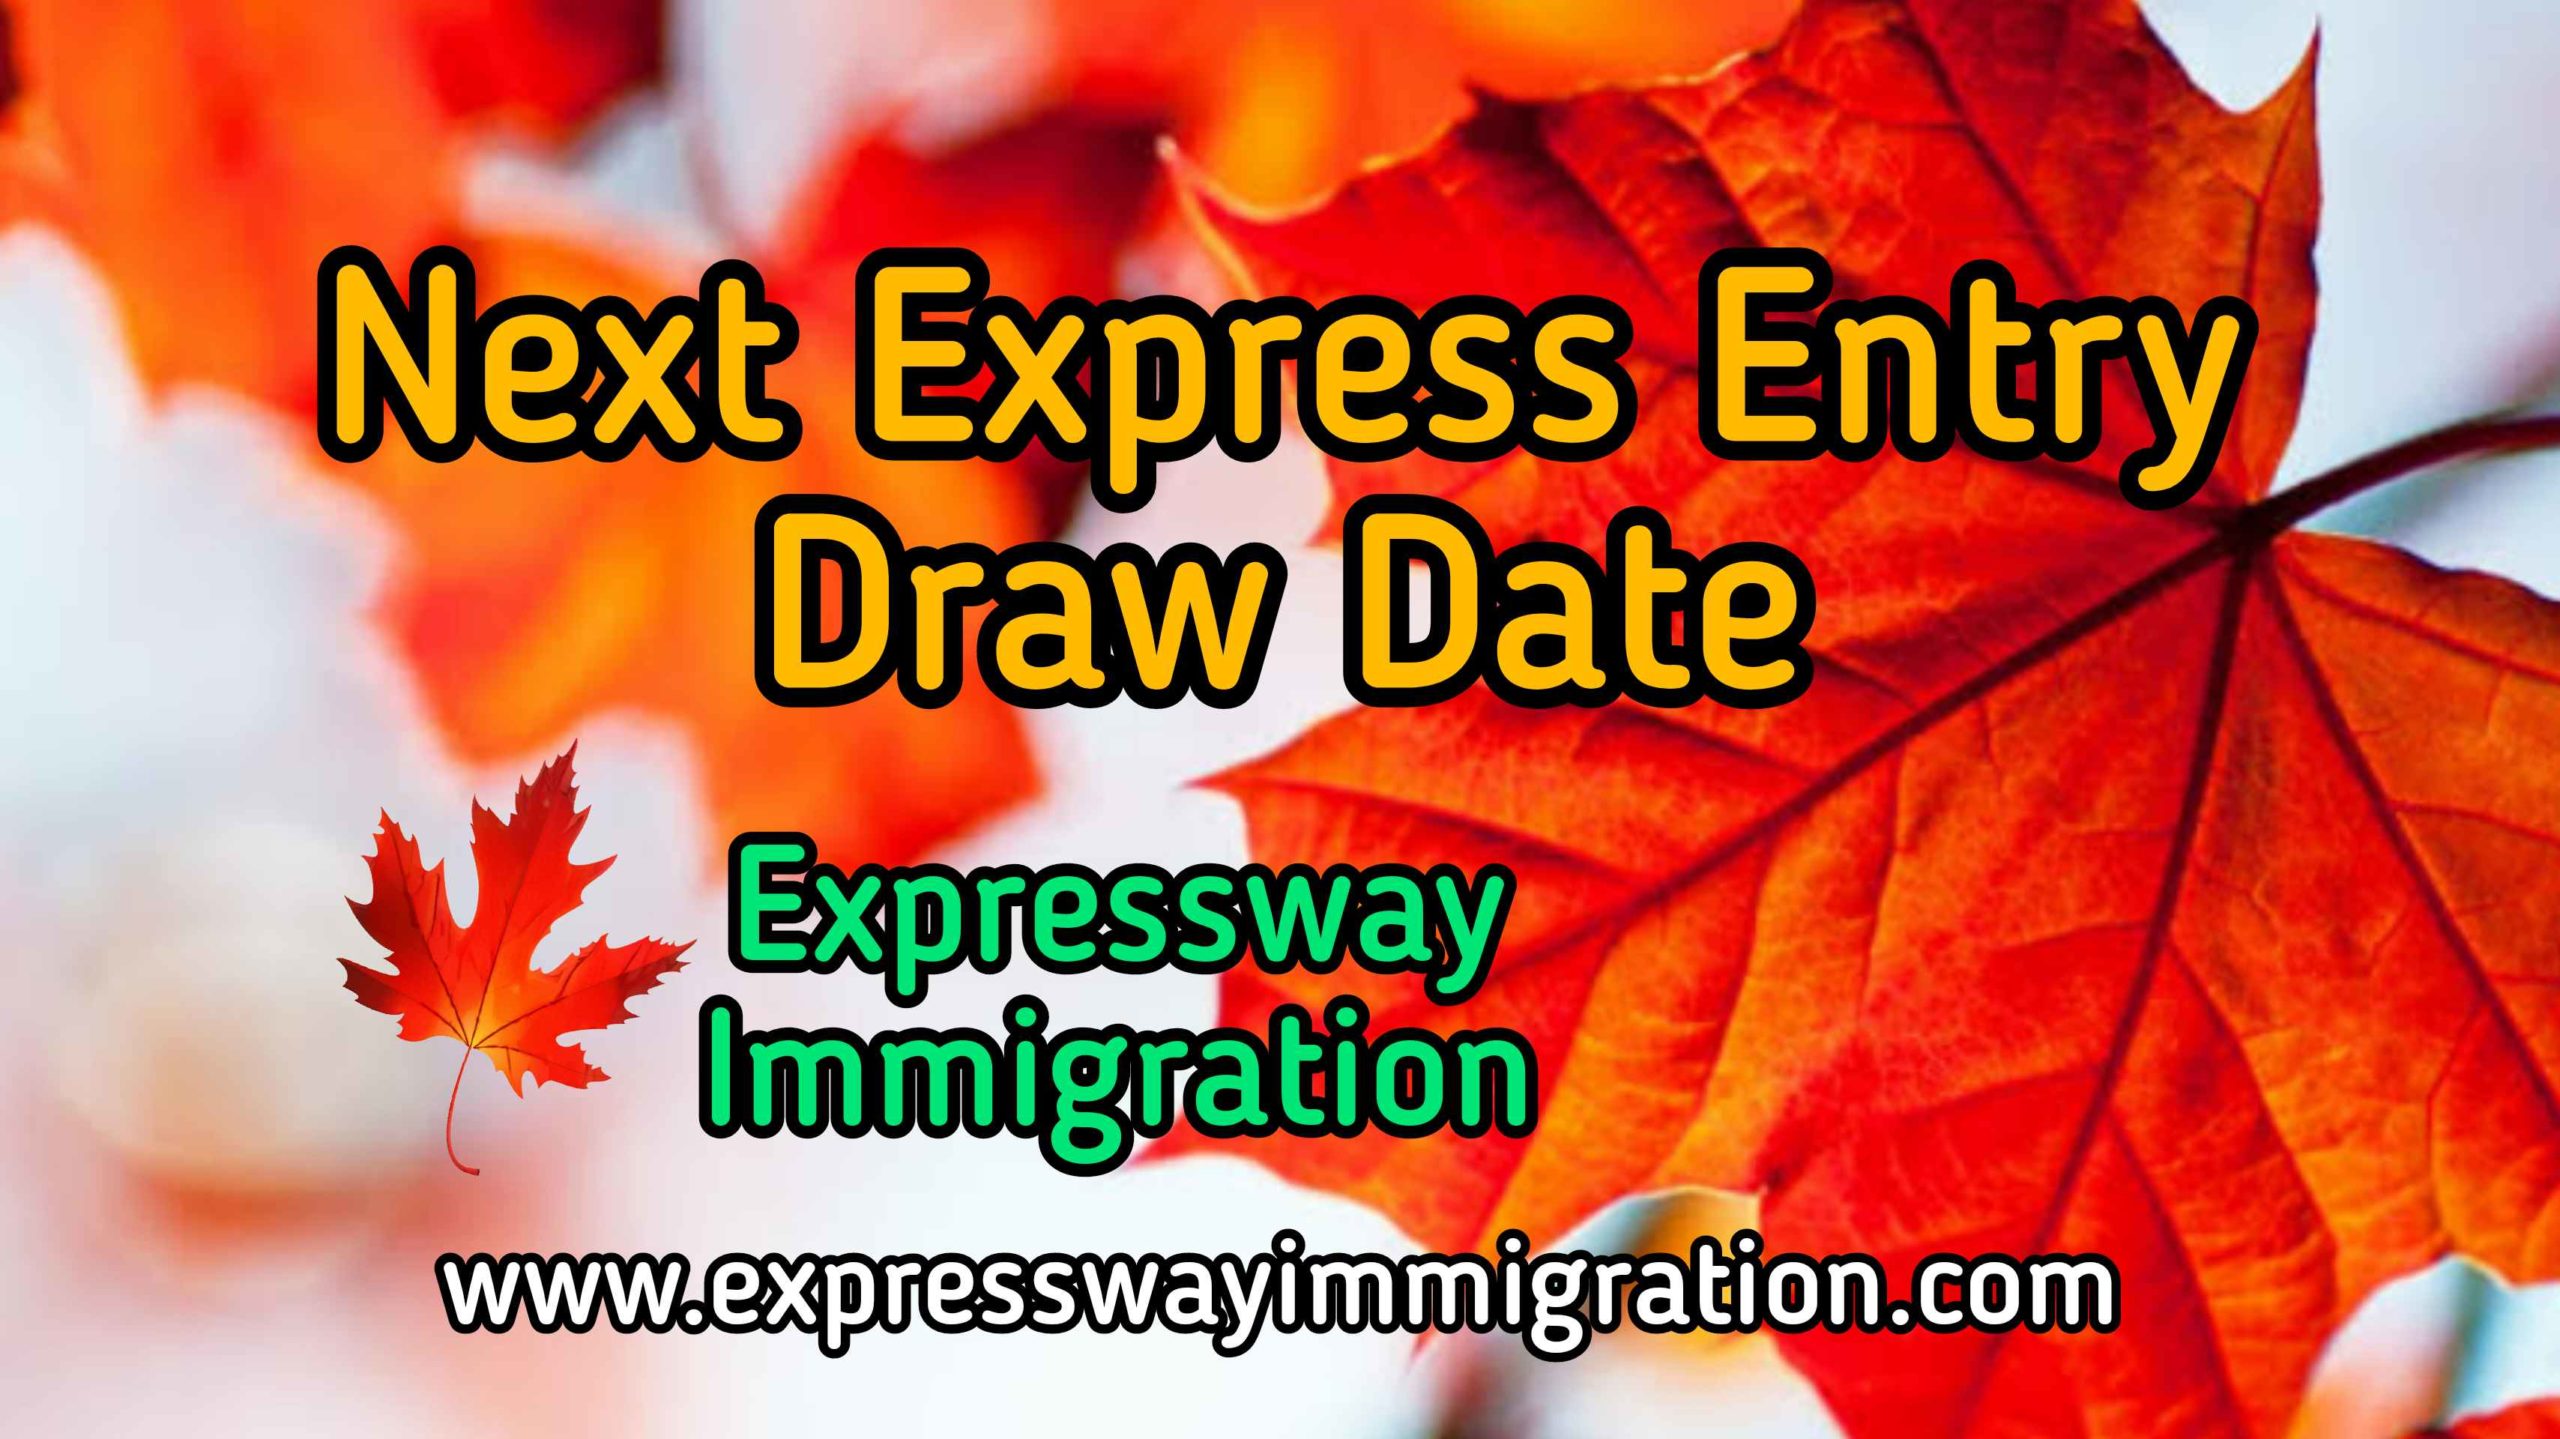 Next Express Entry Draw Date Prediction